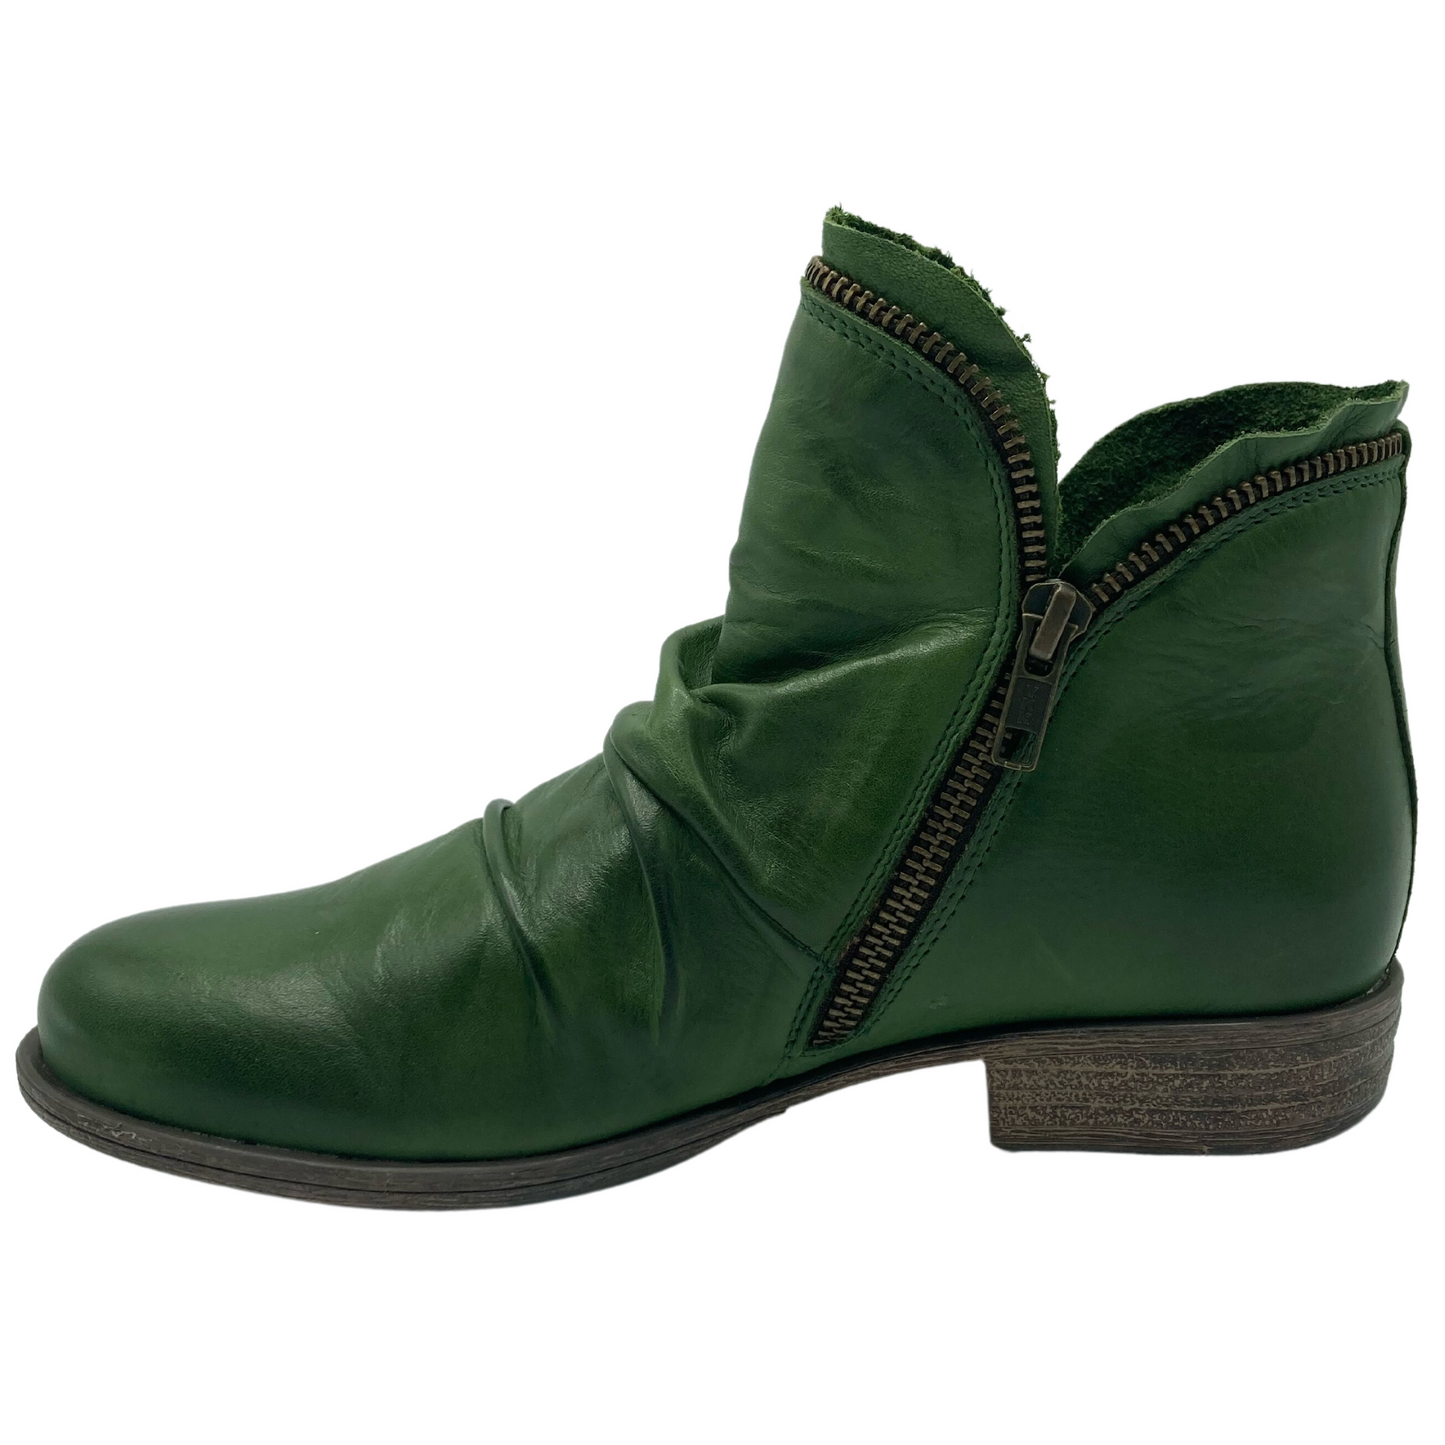 Left facing view of short, green, leather ankle boot with zipper detail and block heel